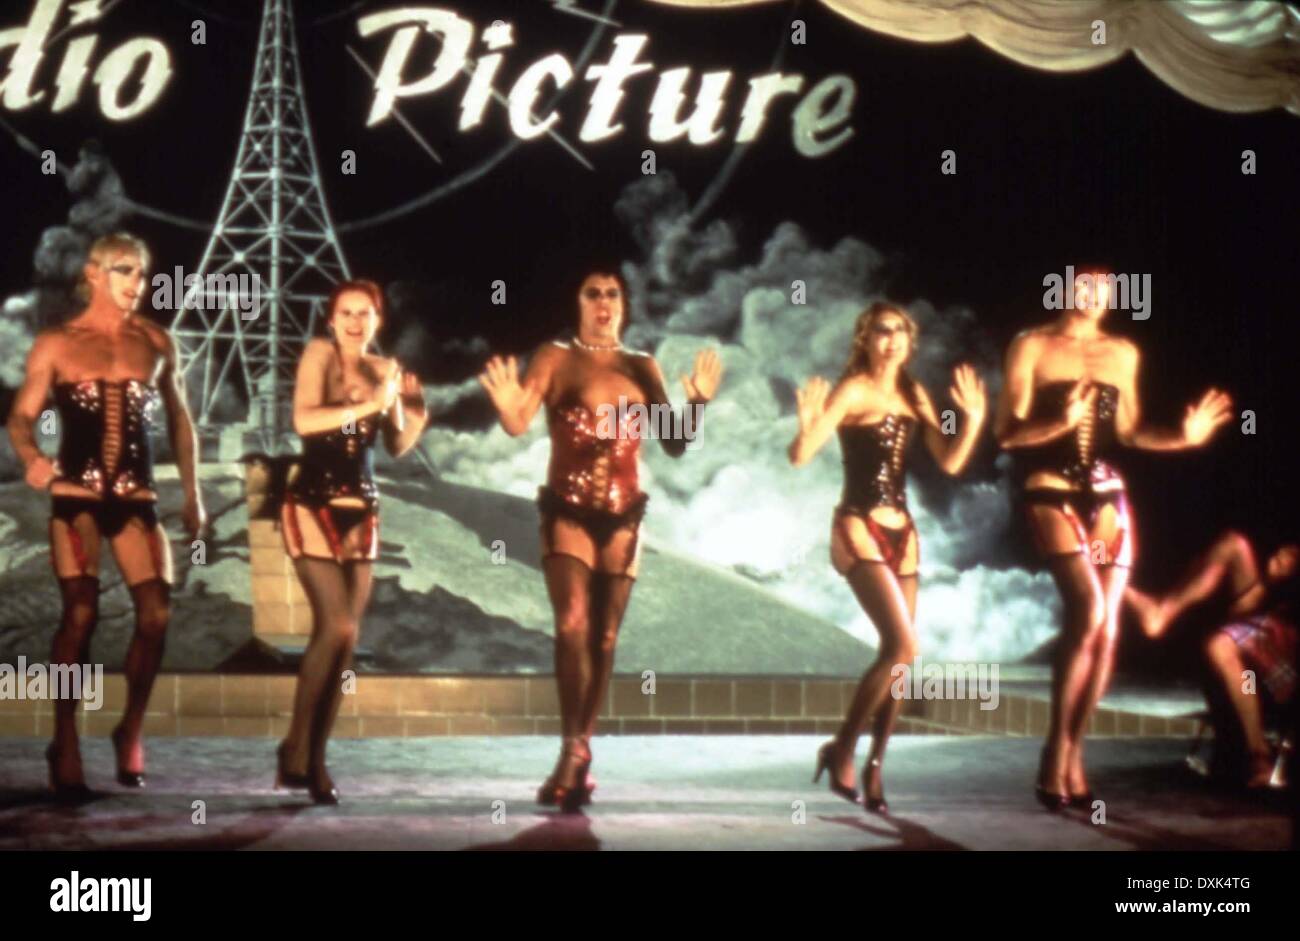 THE rocky horror picture show Foto Stock